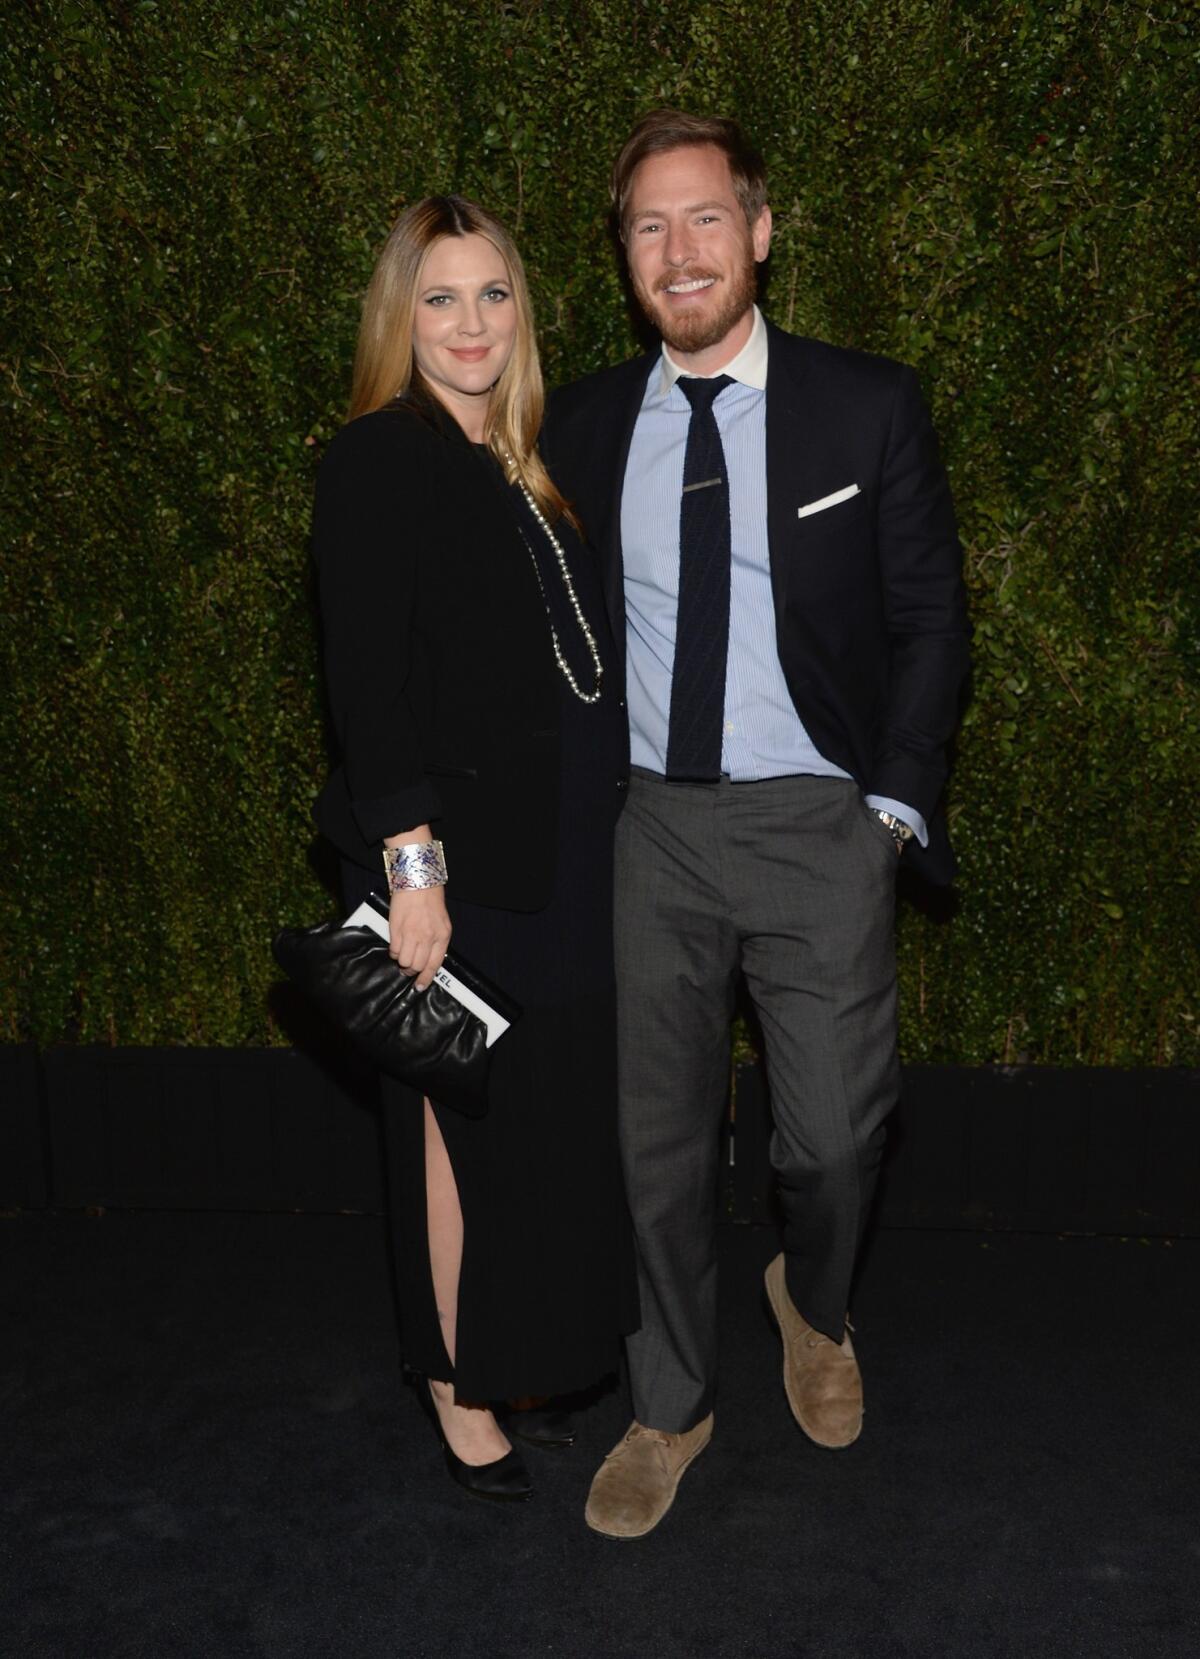 Drew Barrymore and Will Kopelman welcome daughter Frankie Barrymore Kopelman. This is the second child for the couple.